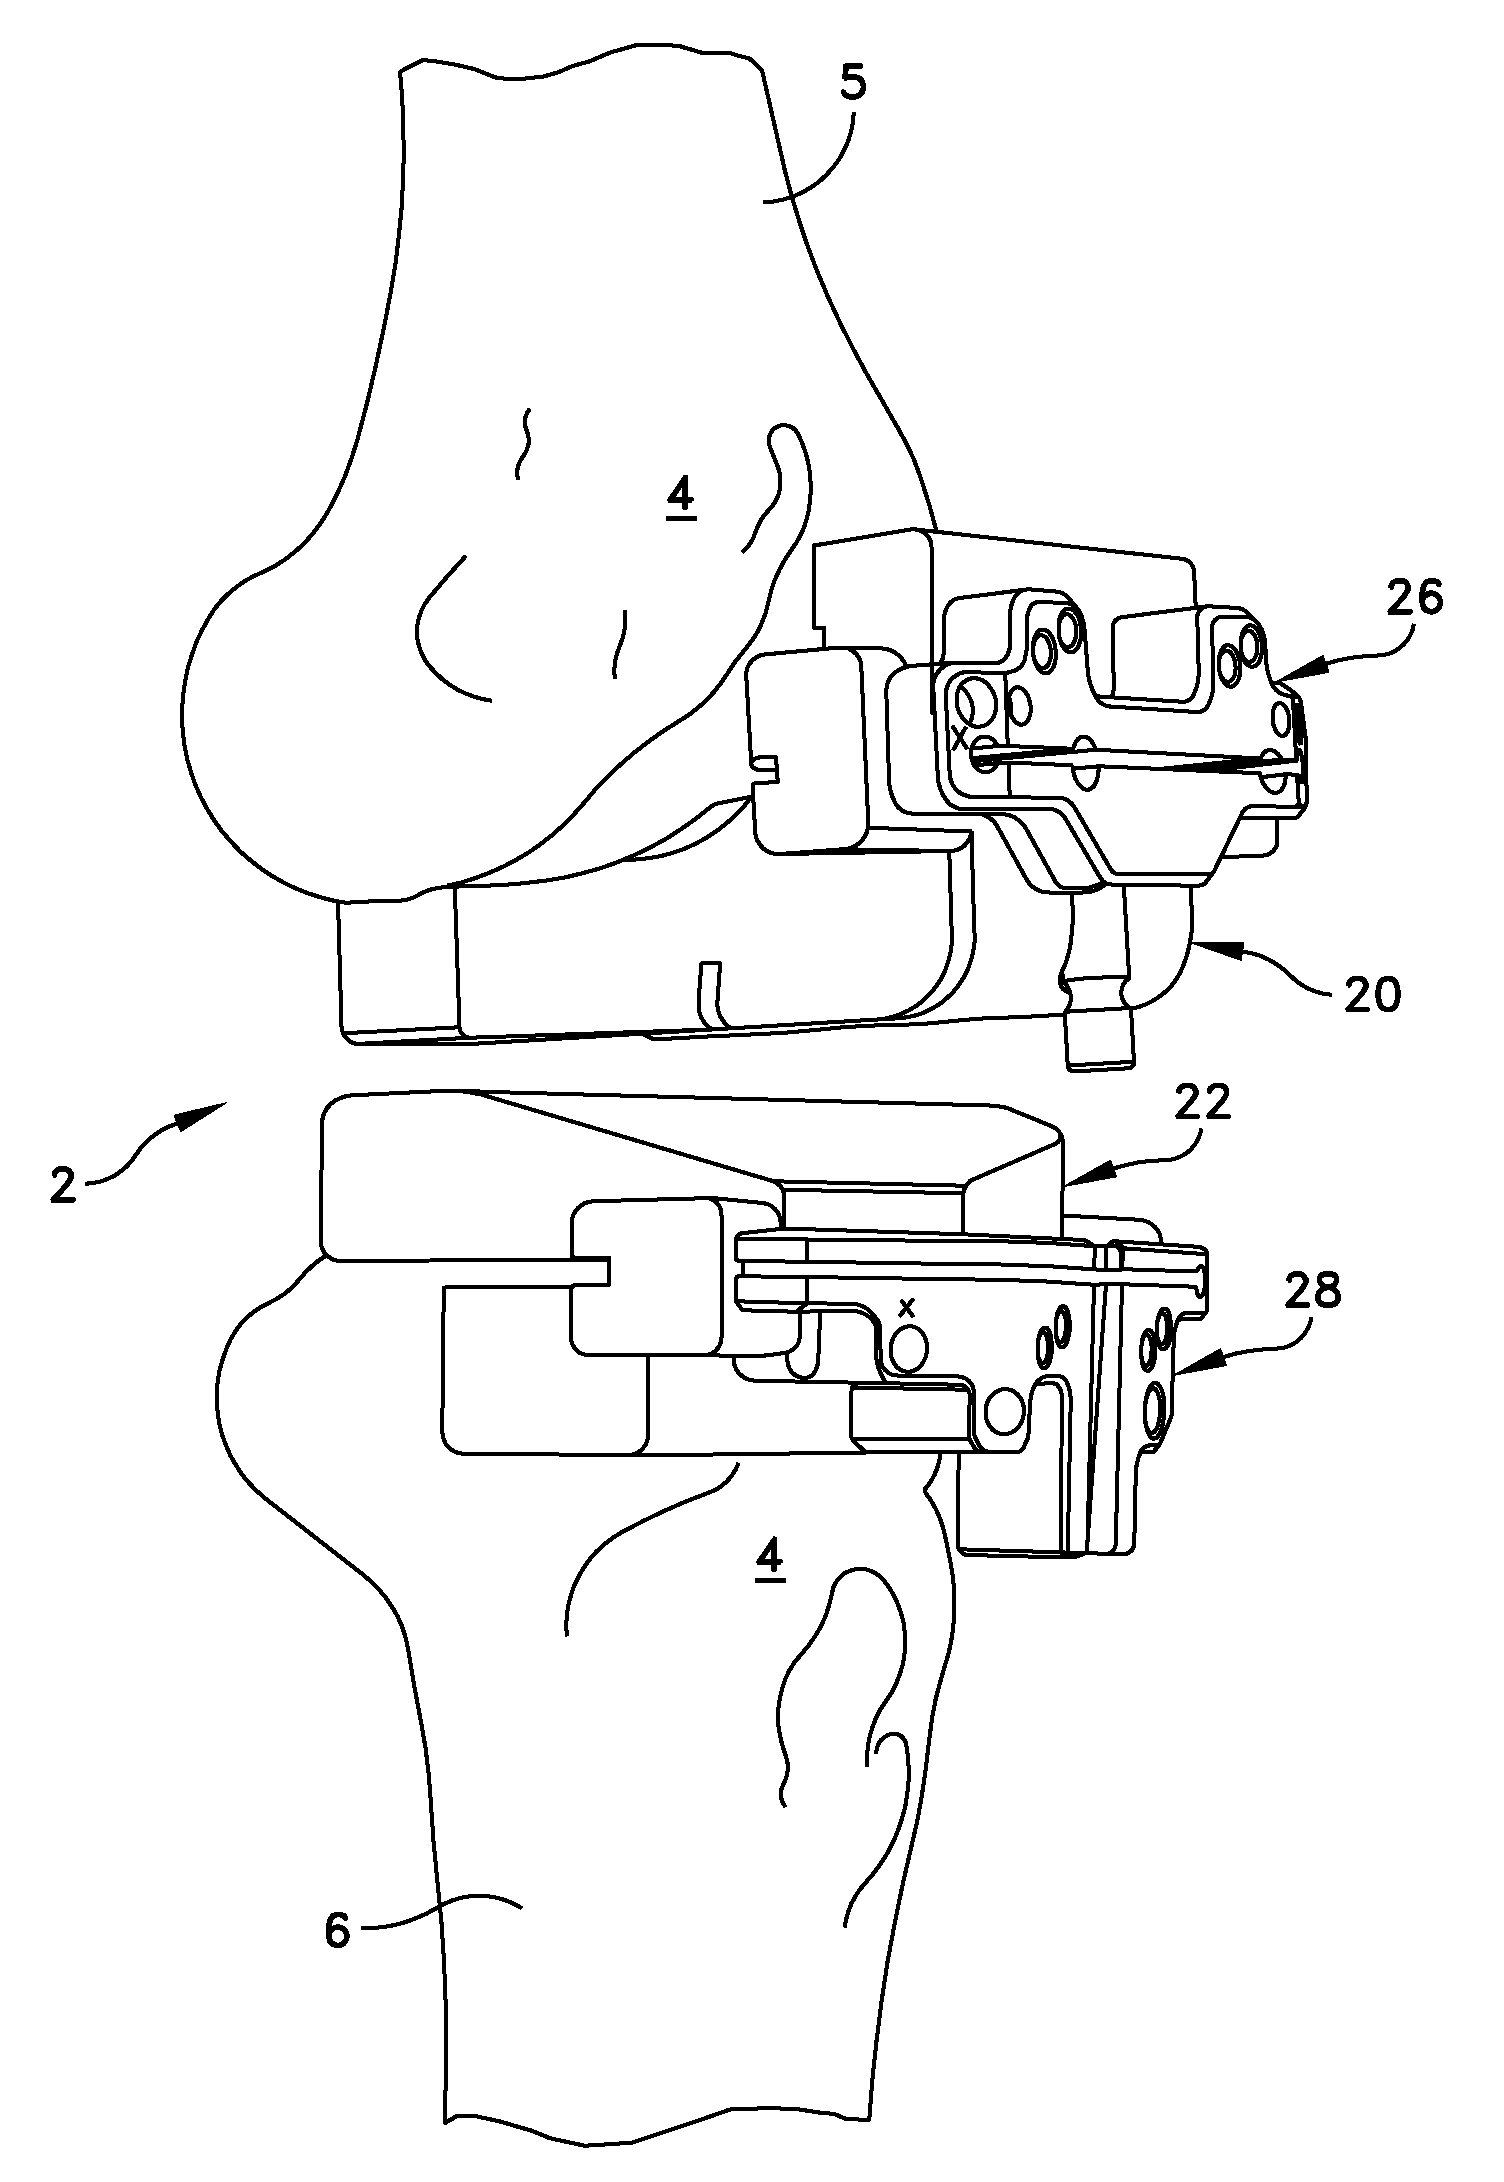 Method For Forming A Patient Specific Surgical Guide Mount